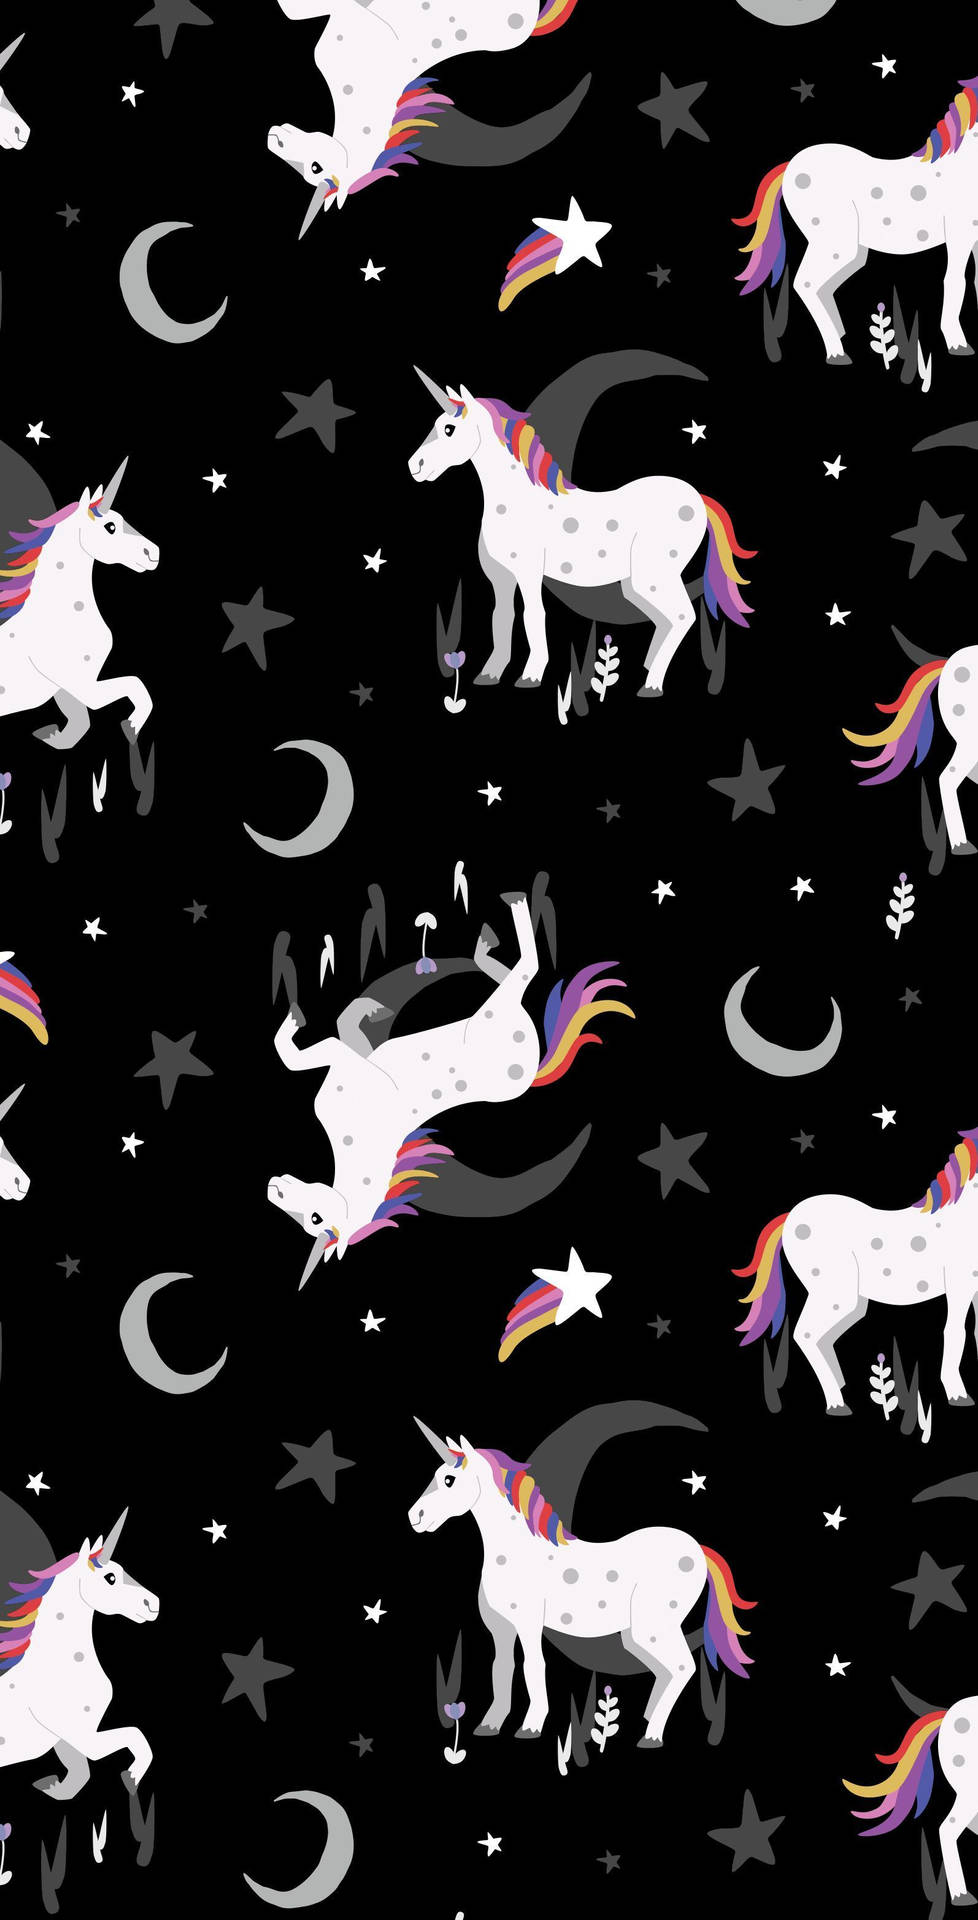 Step into a whimsical world with this cool unicorn Wallpaper